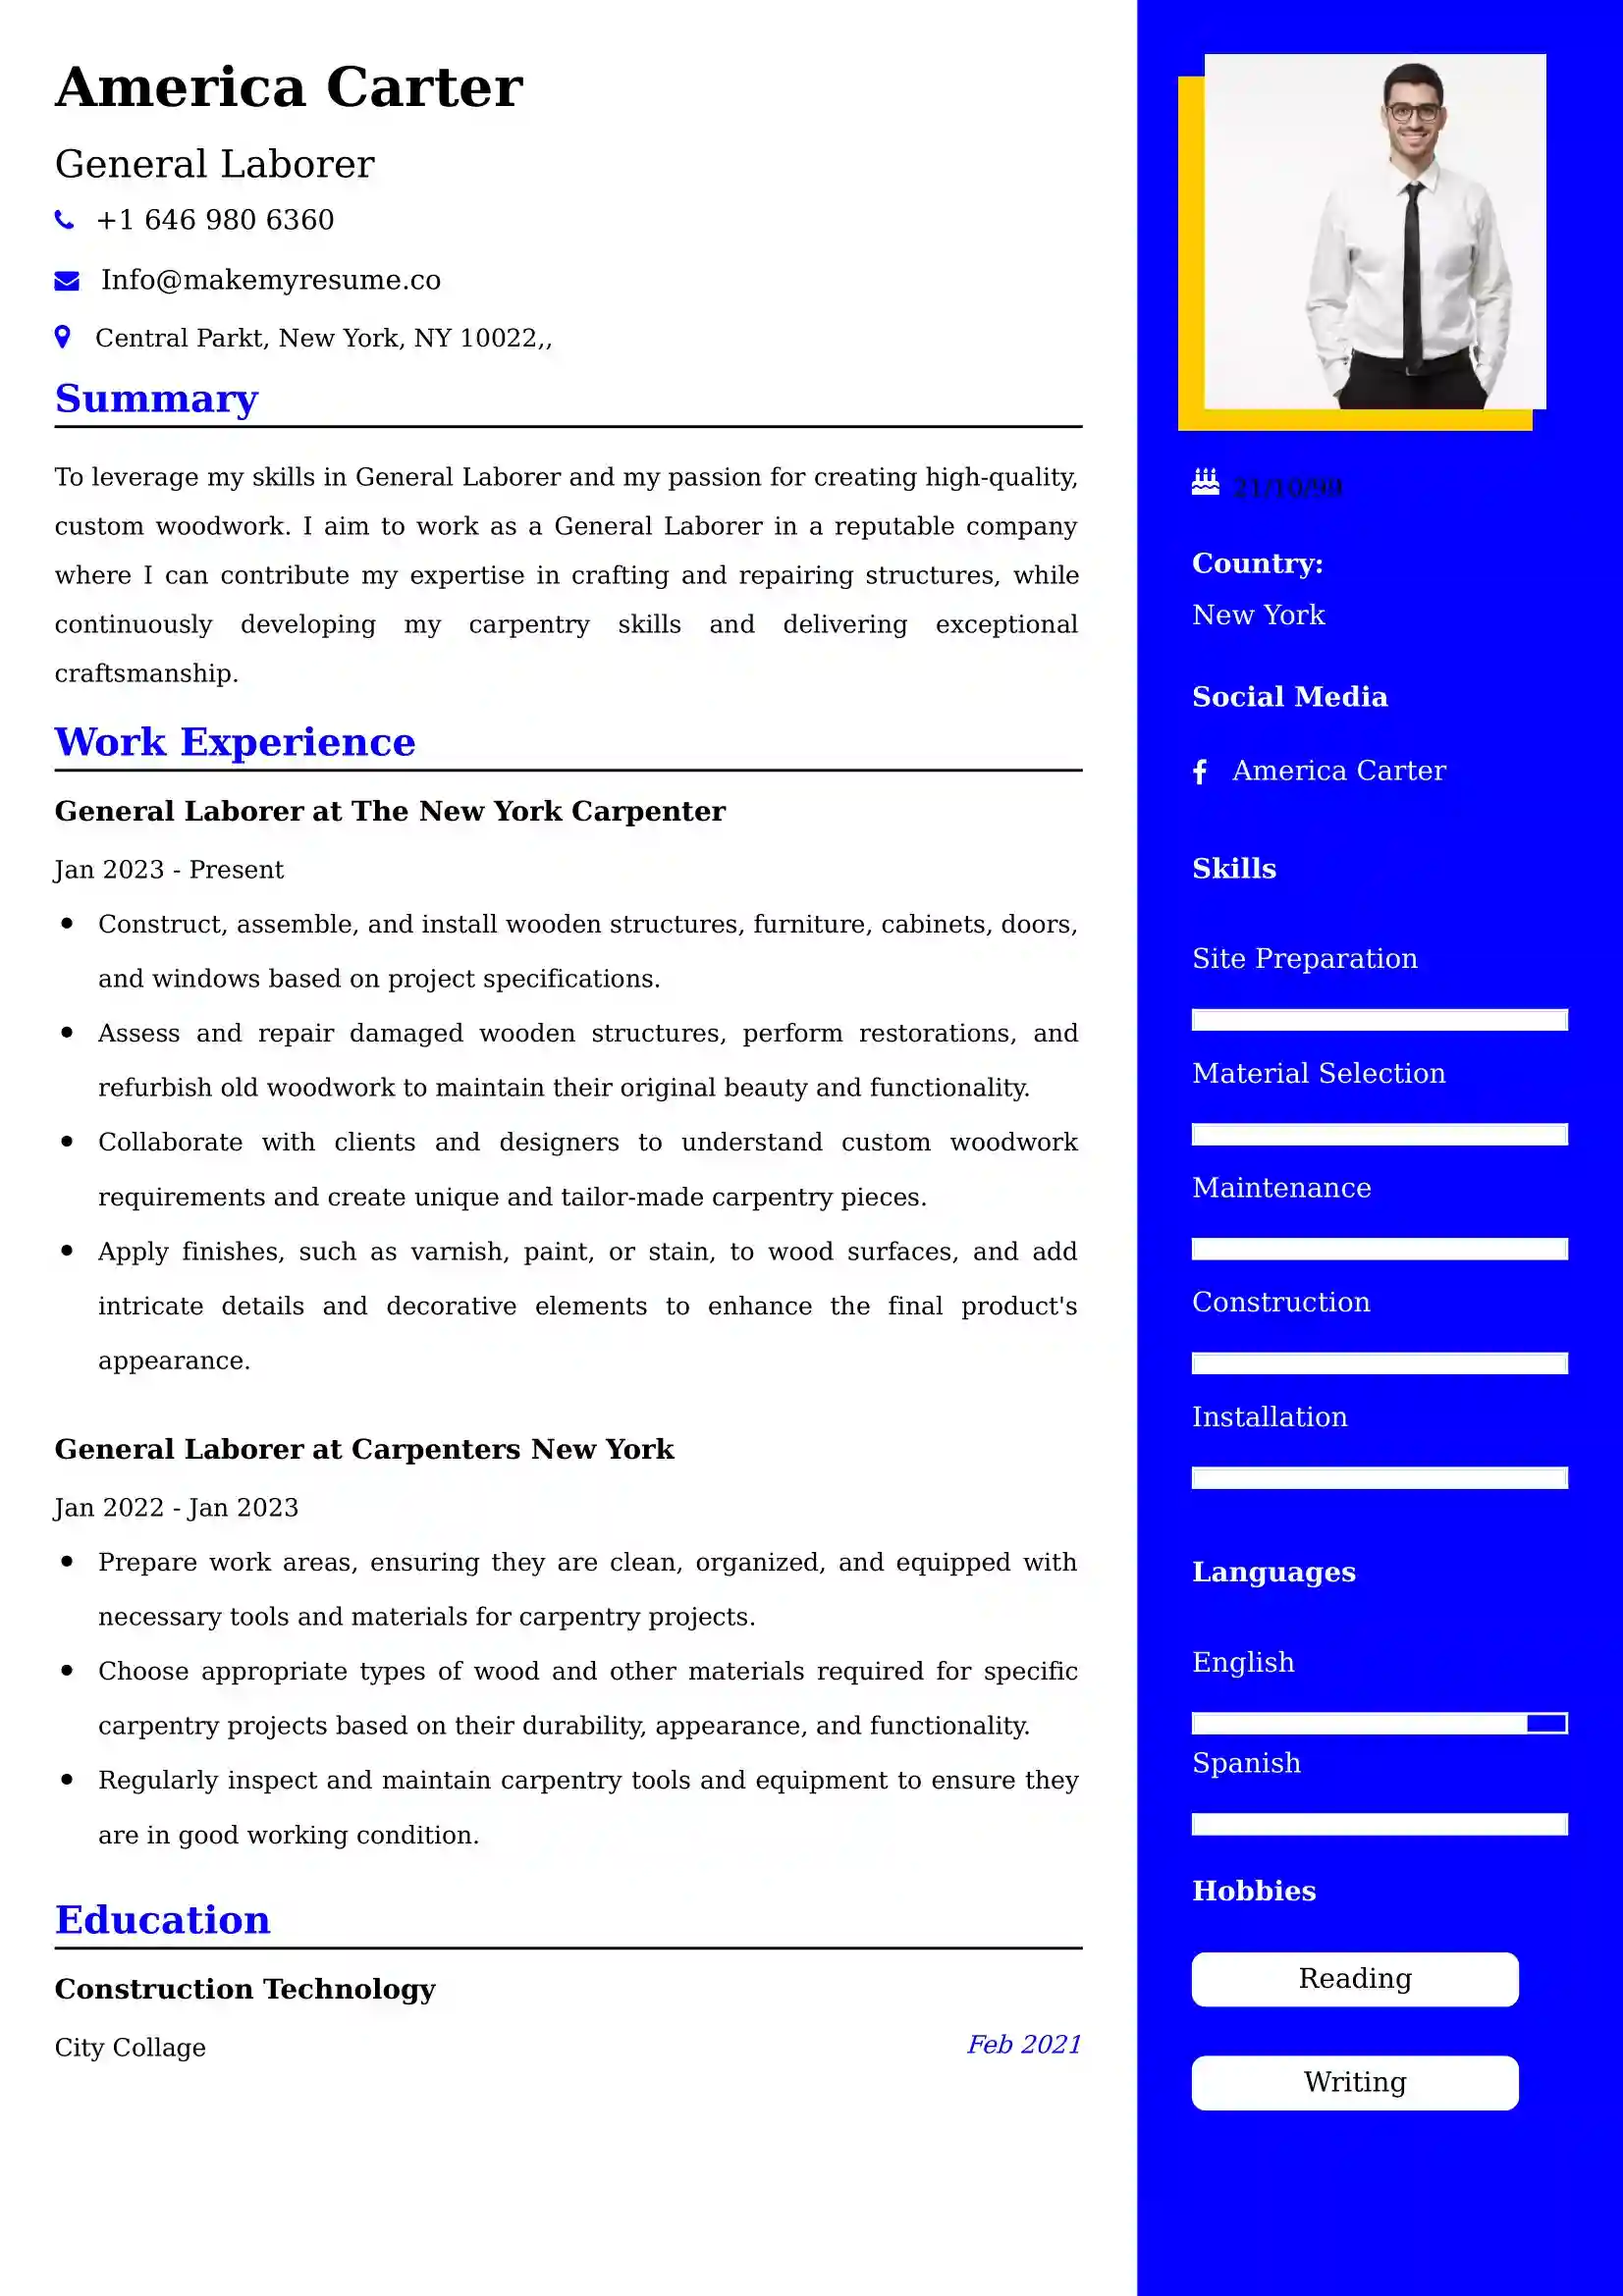 General Laborer Resume Examples for UK Jobs - Tips and Guide